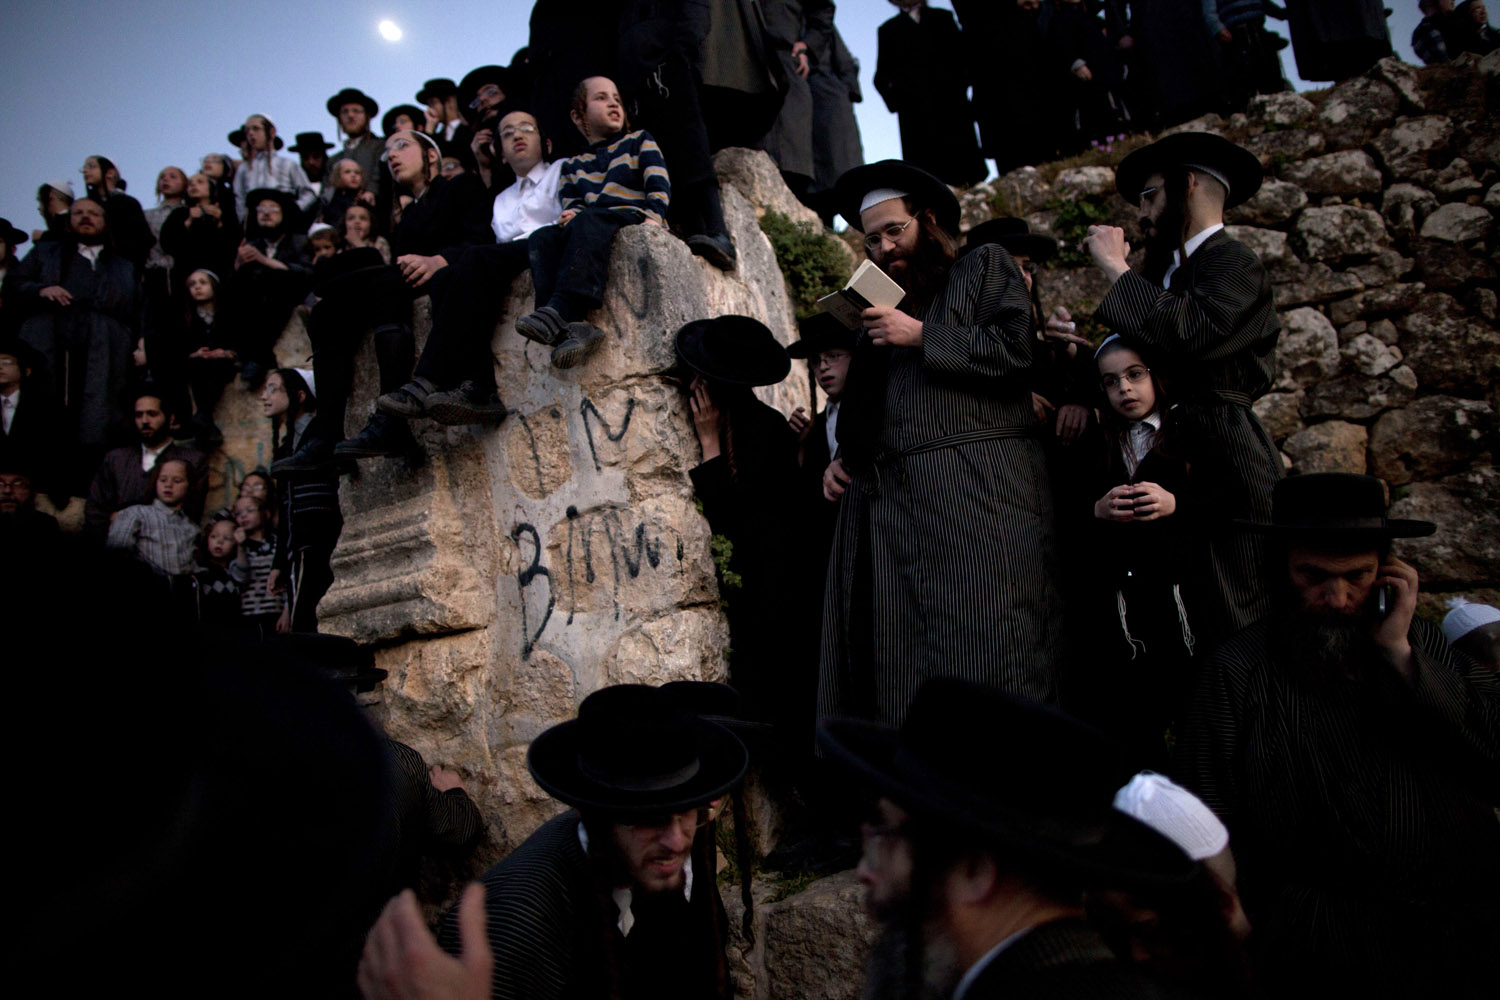 March 24, 2013. Ultra-Orthodox Jews collect water to make matza during the Maim Shelanoo ceremony at a mountain spring, in Jerusalem Sunday. The water is used to prepare the traditional unleavened bread for the high holiday of Passover.